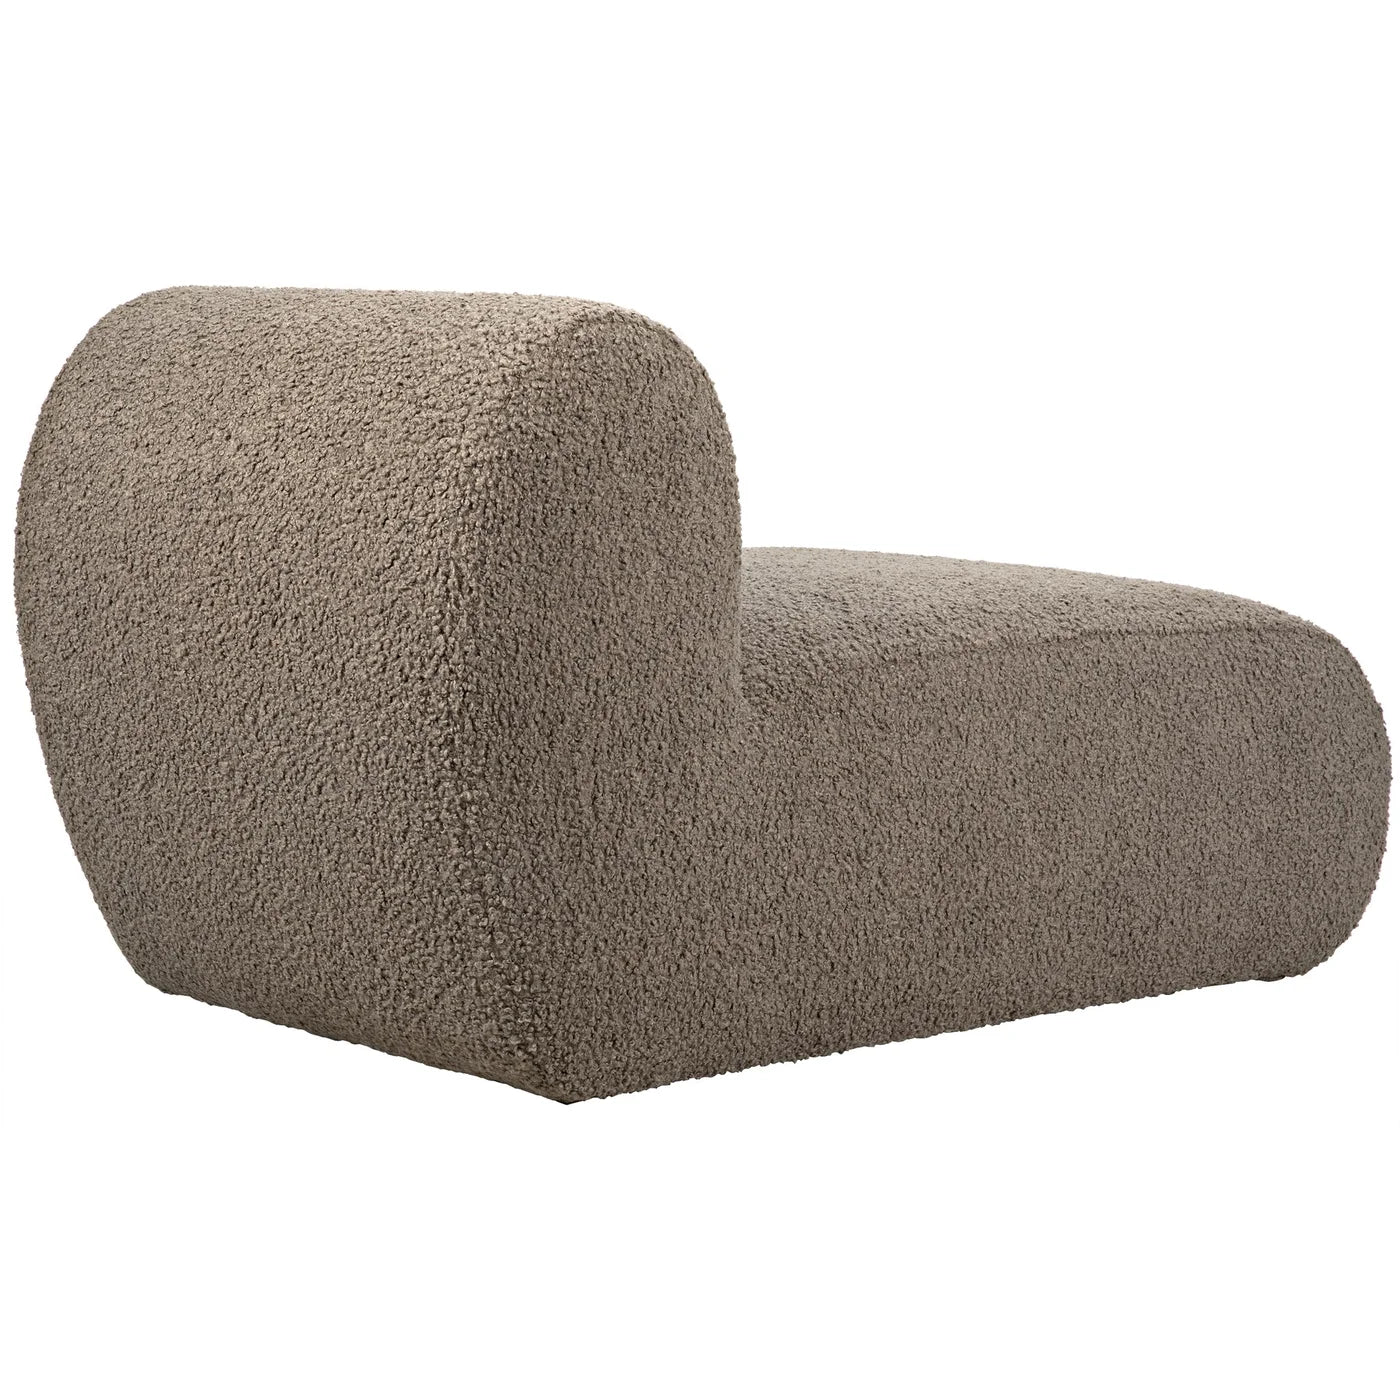 Mallow Chaise-Lounge